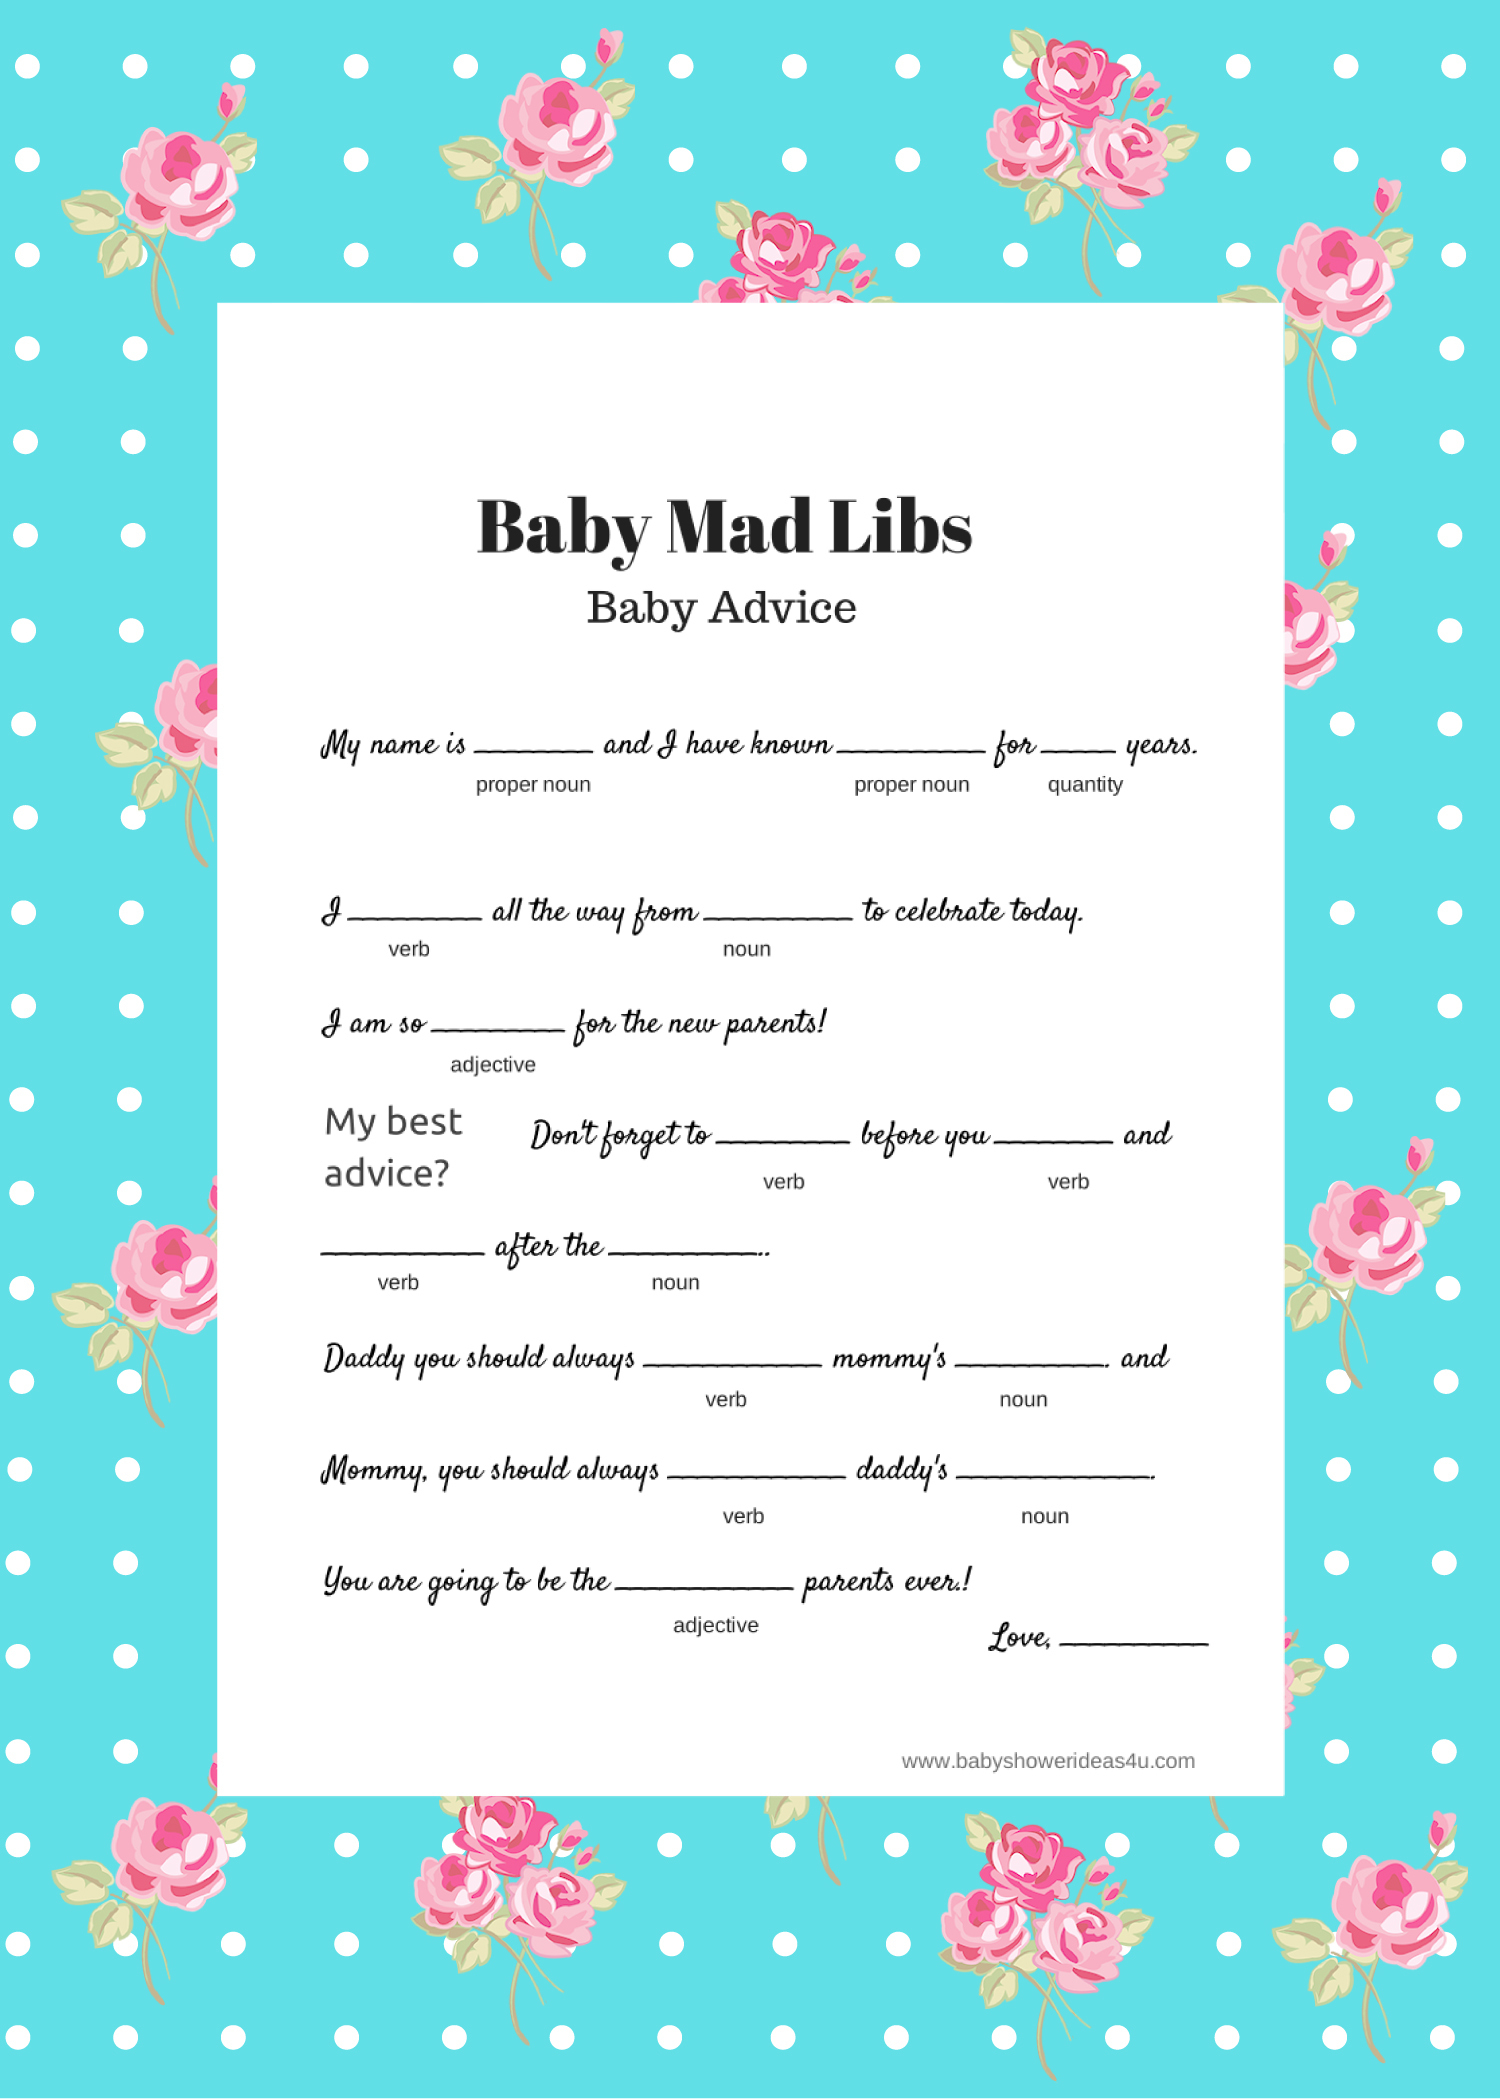 Free Baby Mad Libs Game - Baby Advice - Baby Shower Ideas - Themes - Free Printable Online Baby Shower Games